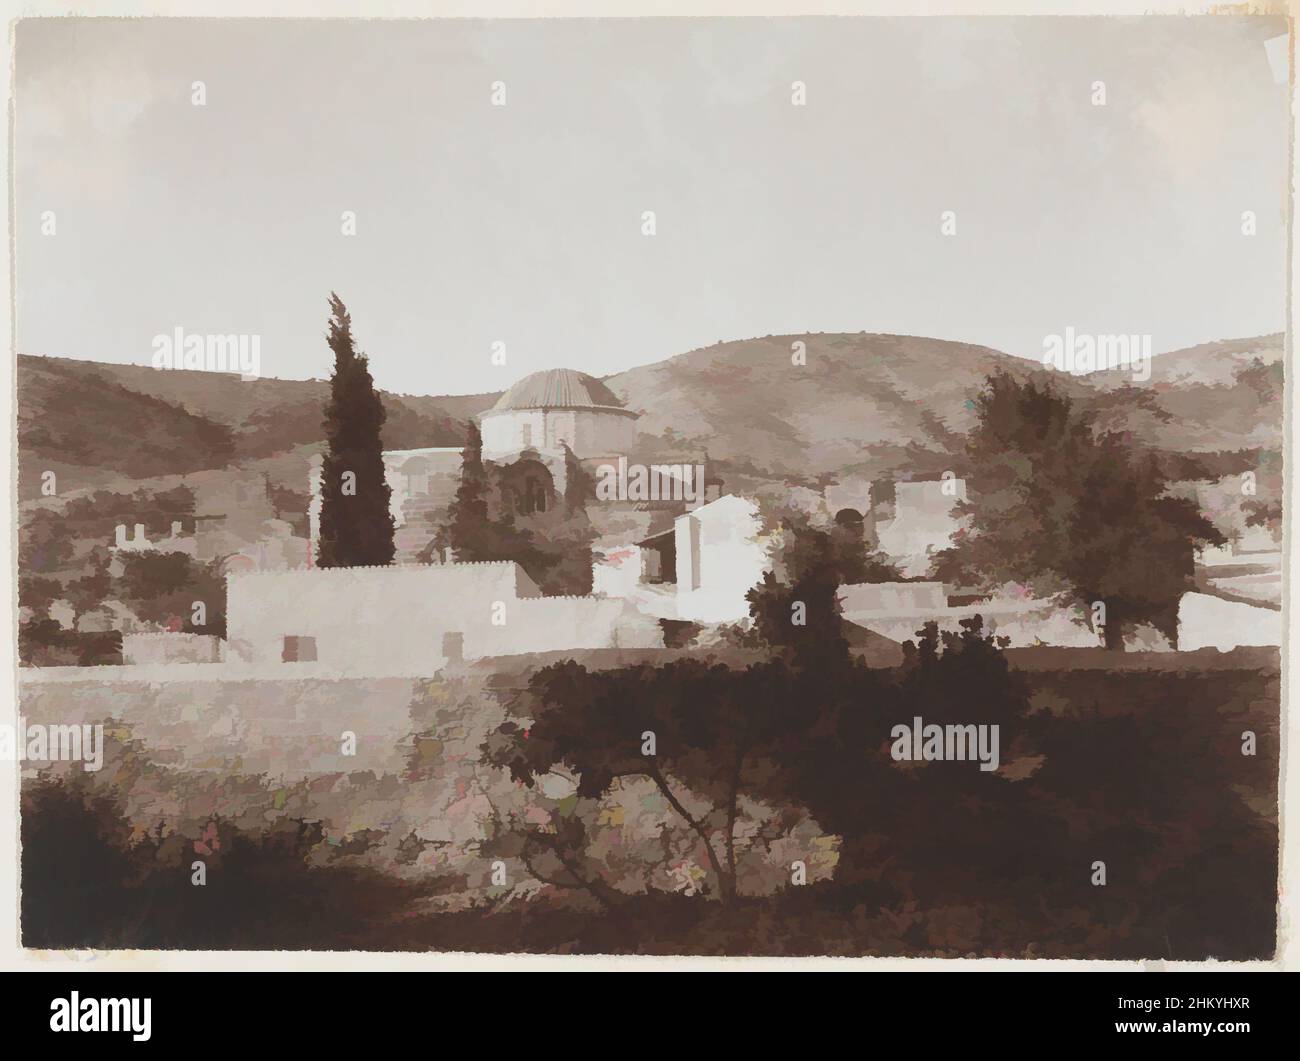 Art inspired by View of the monastery of Daphni, near Athens, Greece, Daphni Monastery, L. Heldring, Griekenland, 1898, photographic support, height 82 mm × width 110 mm, Classic works modernized by Artotop with a splash of modernity. Shapes, color and value, eye-catching visual impact on art. Emotions through freedom of artworks in a contemporary way. A timeless message pursuing a wildly creative new direction. Artists turning to the digital medium and creating the Artotop NFT Stock Photo